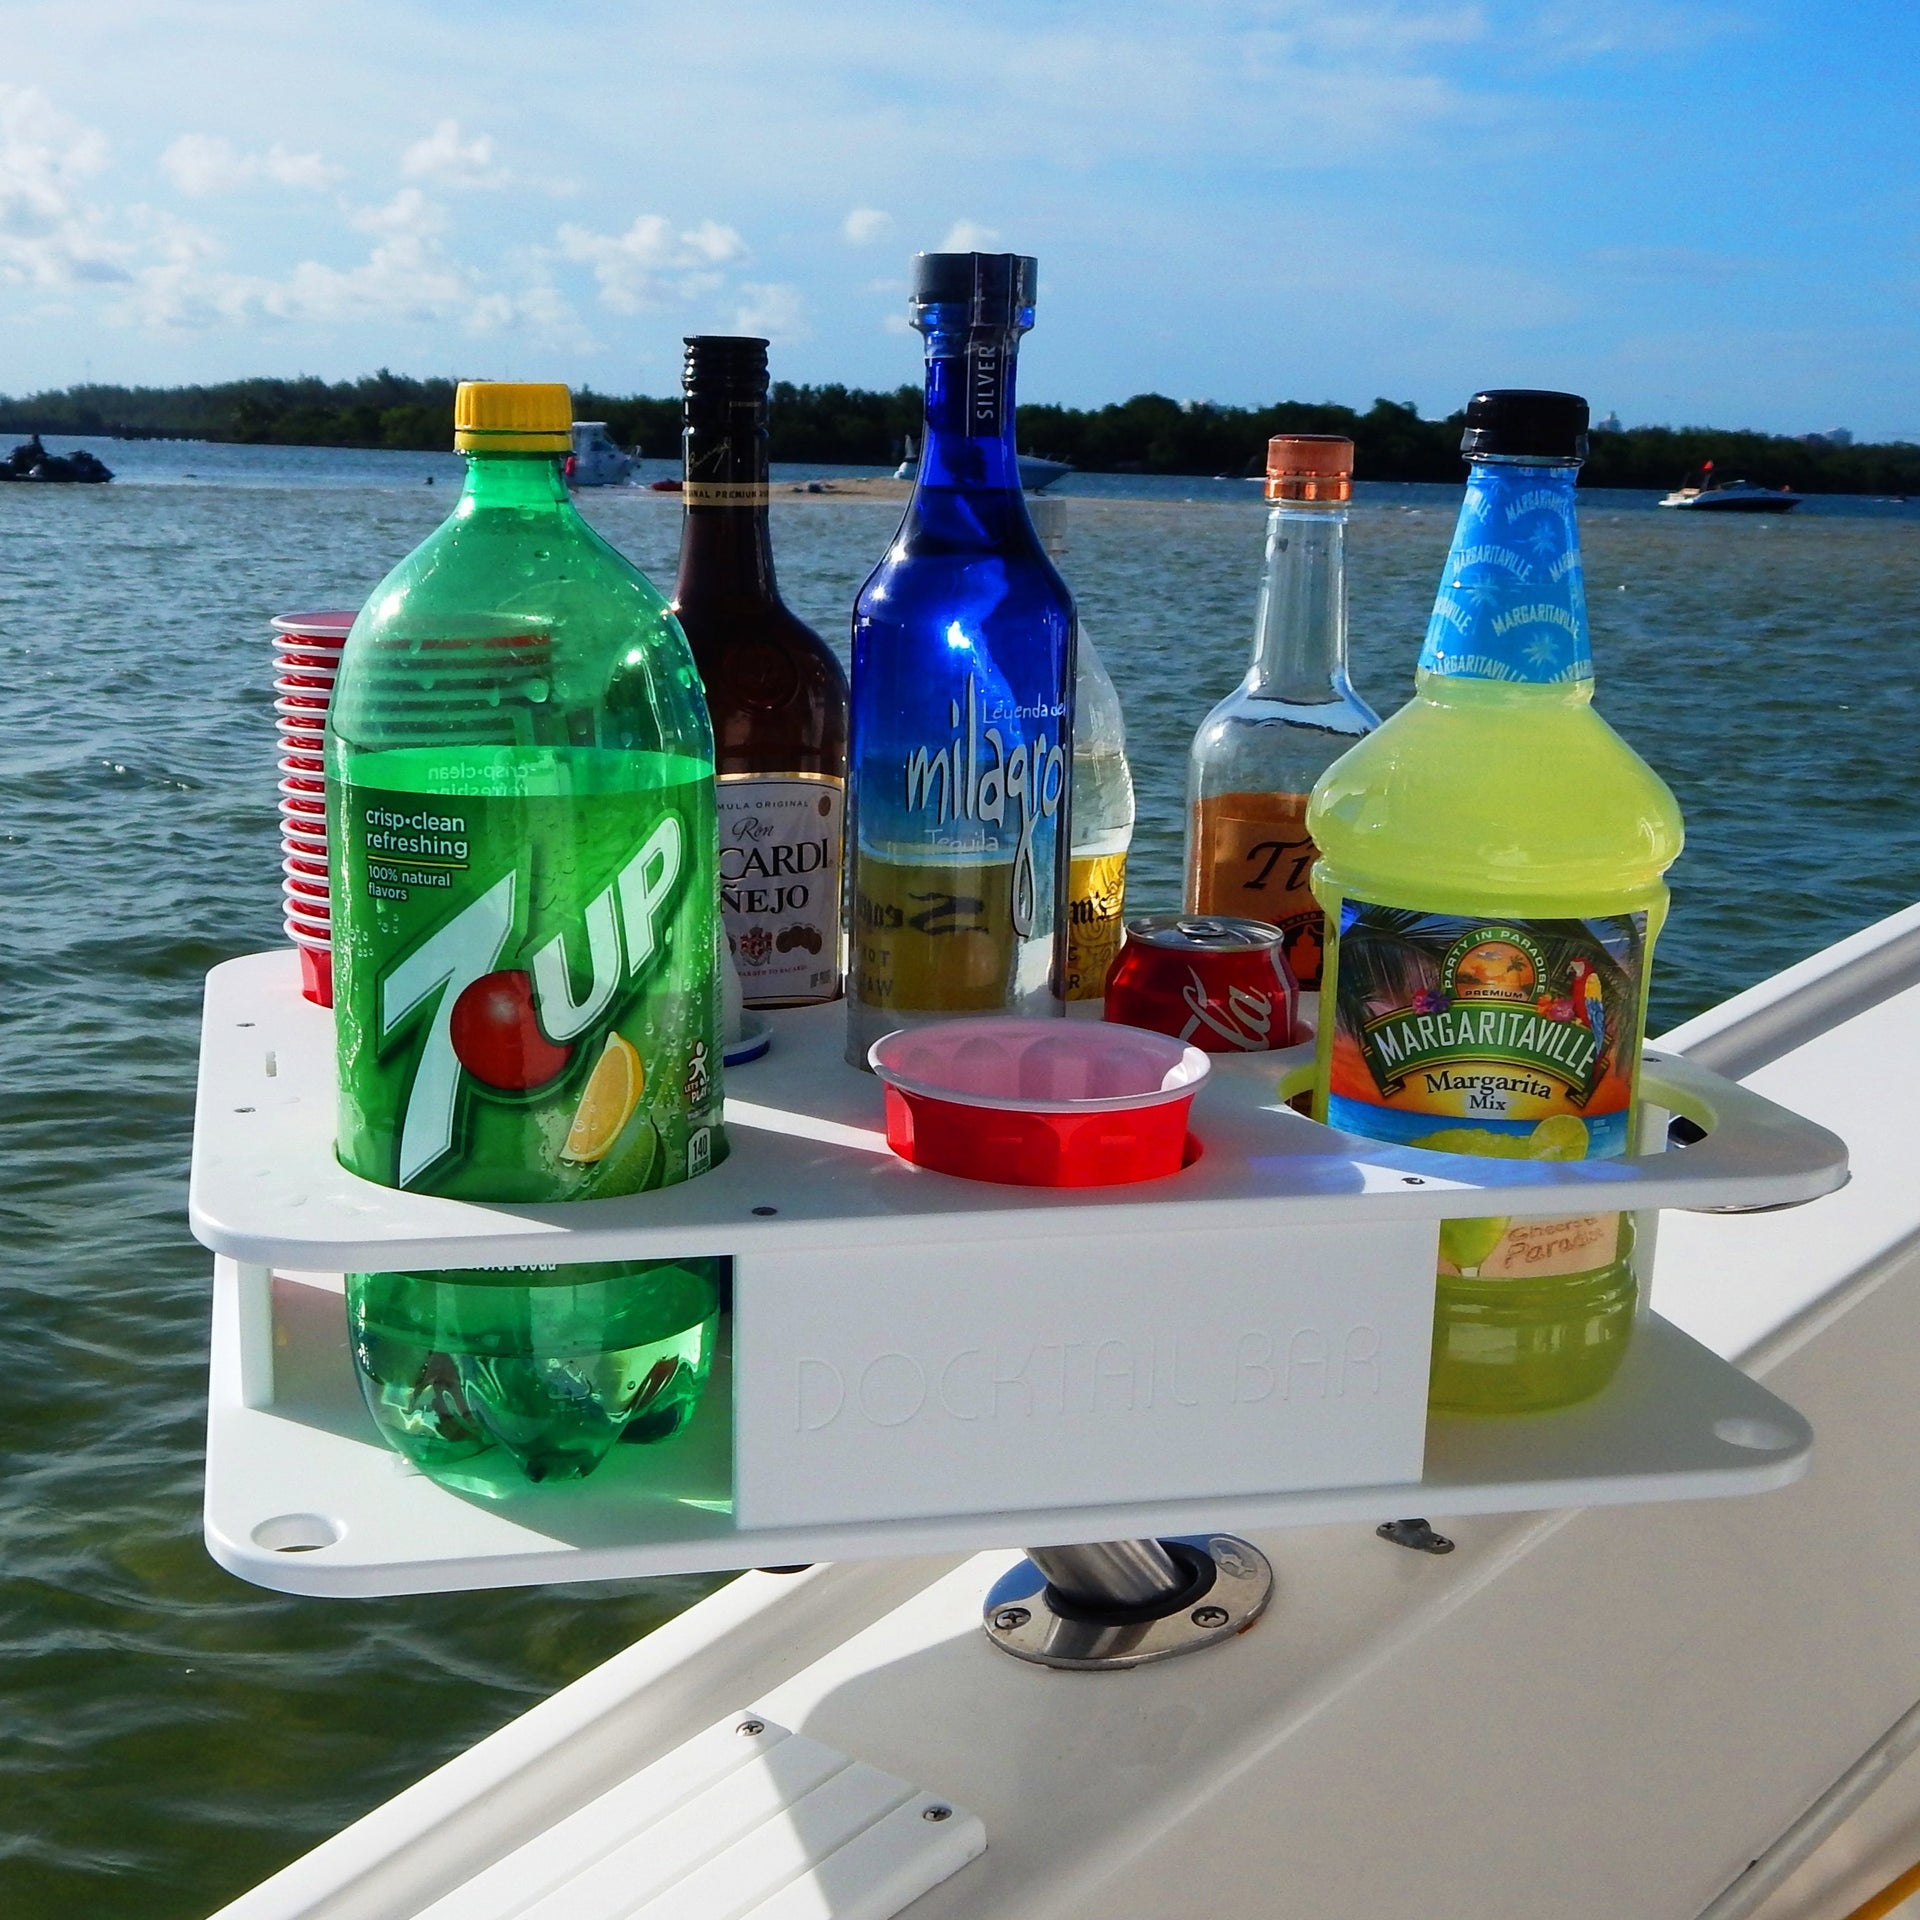 Buy 12 Colors, Best Cup Holder for Drinks, Fishing Rod/Pole, Boat